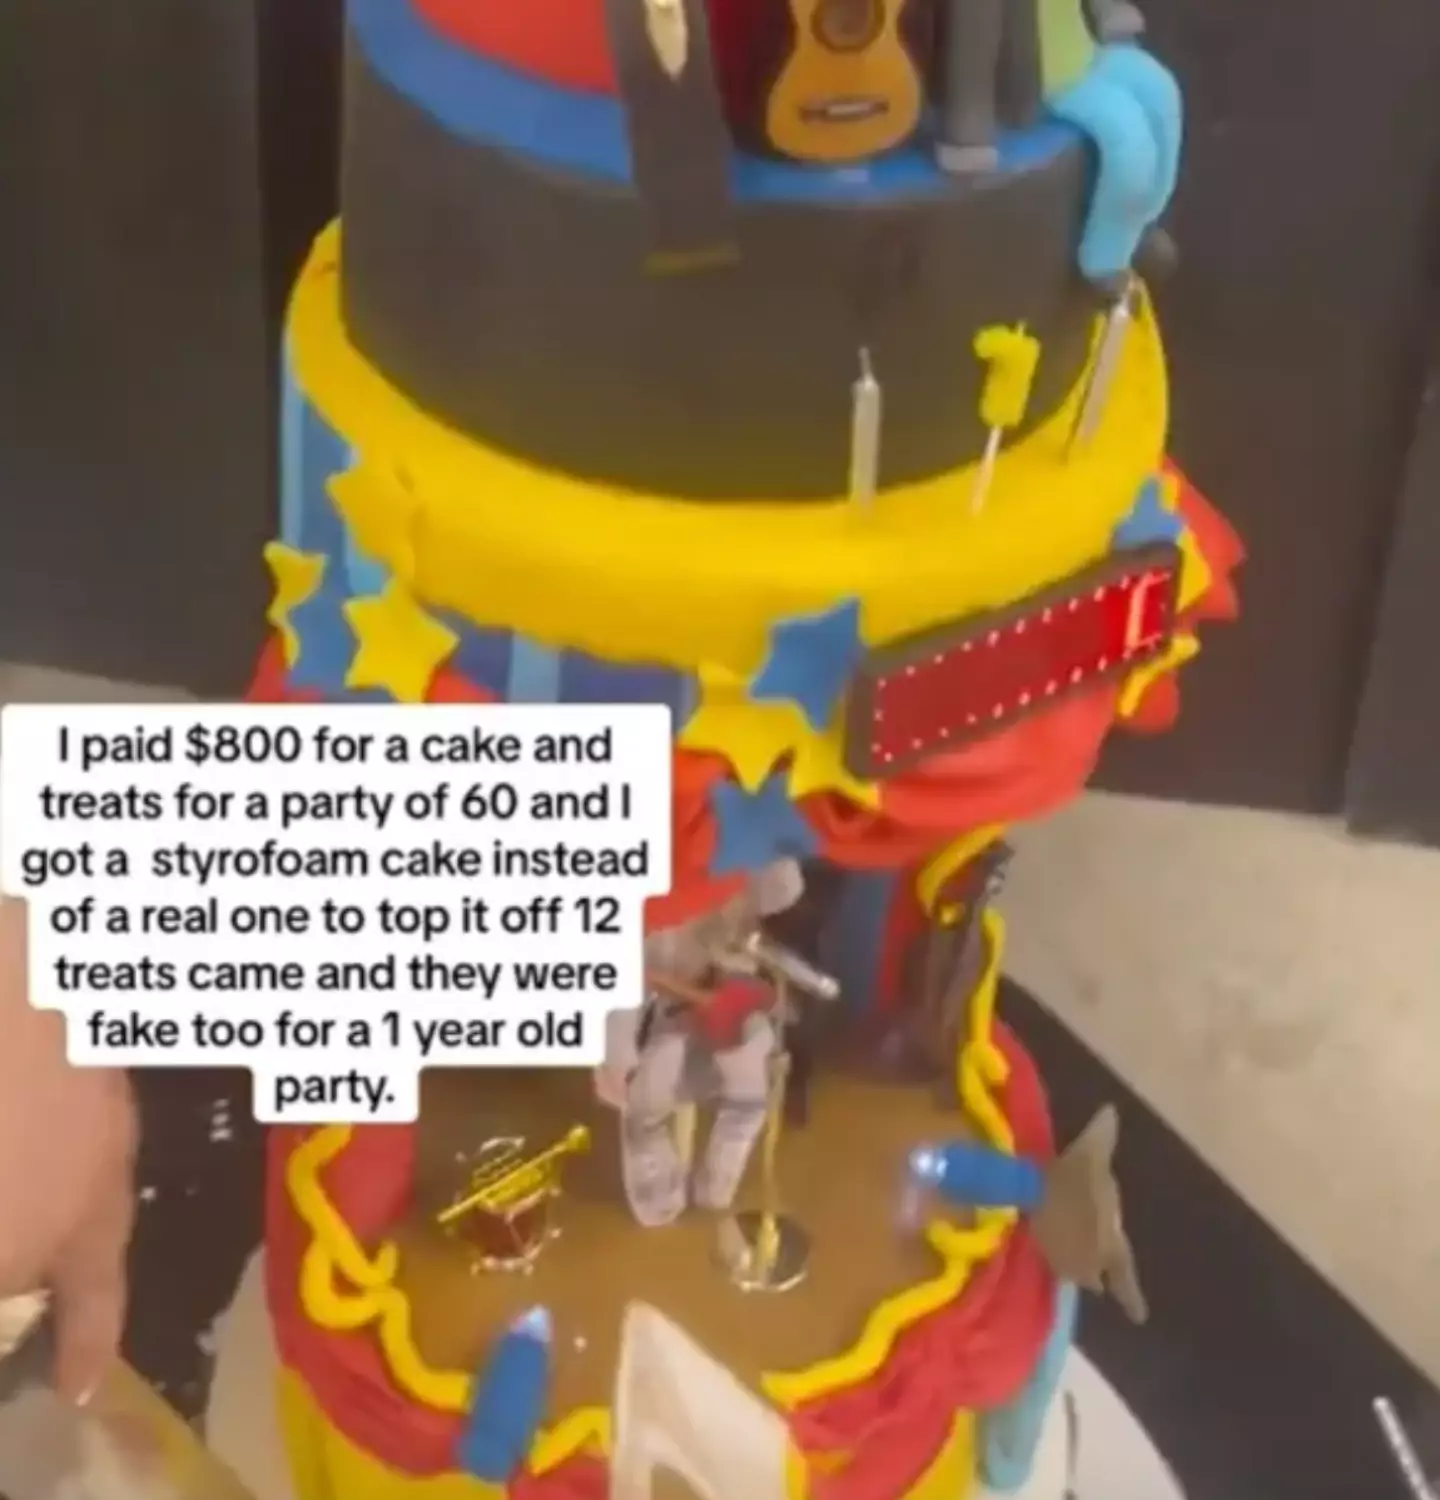 The costly cake was made entirely out of styrofoam.